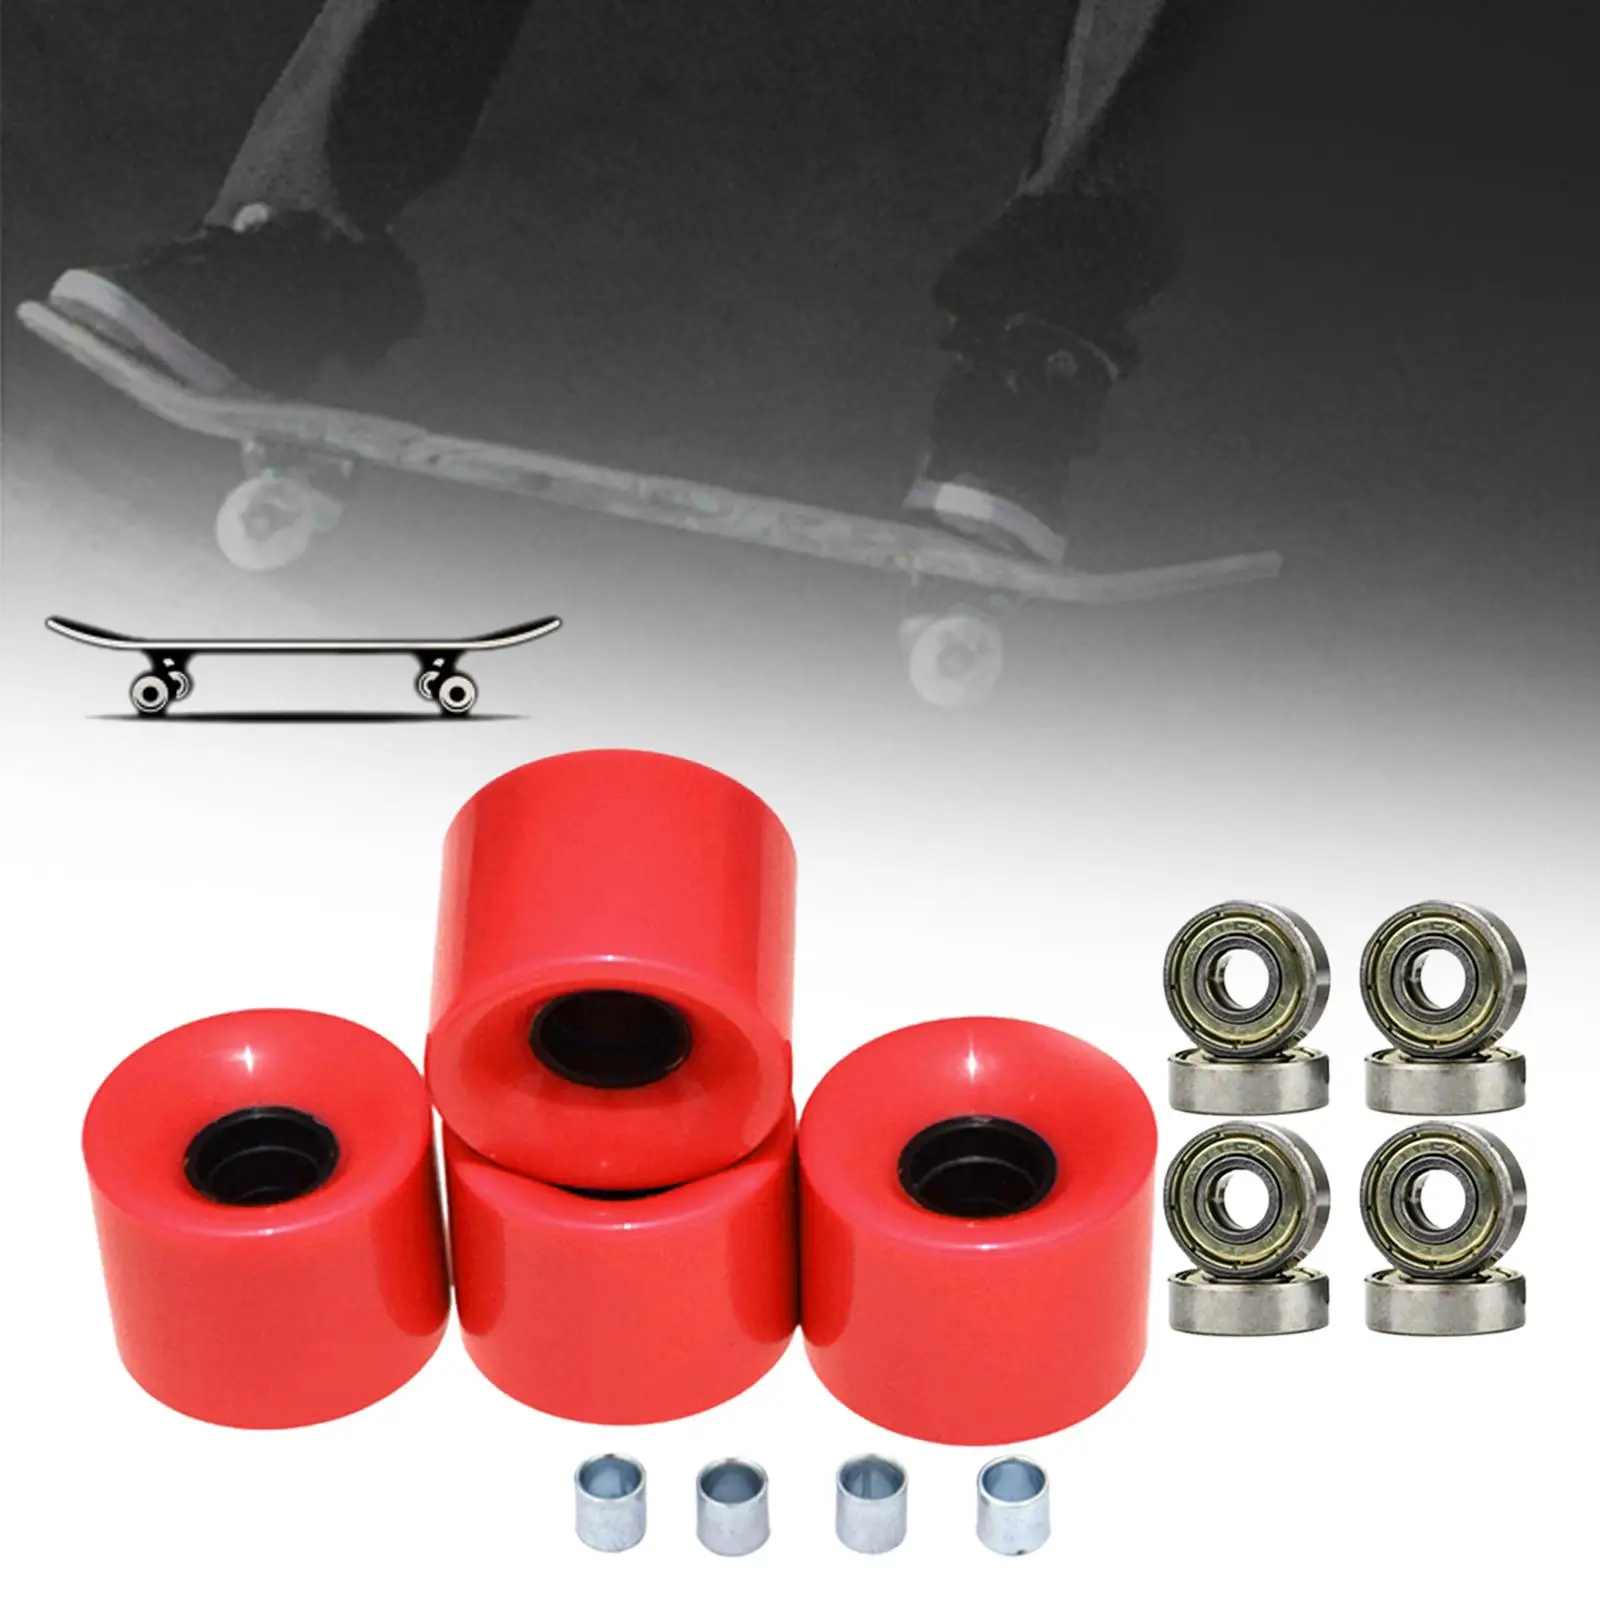 4PCS 60mm 78A PU Skateboard Wheels w/ Bearings and Spacers for Cruising and Street Tricks, Smooth Concrete or Asphalt